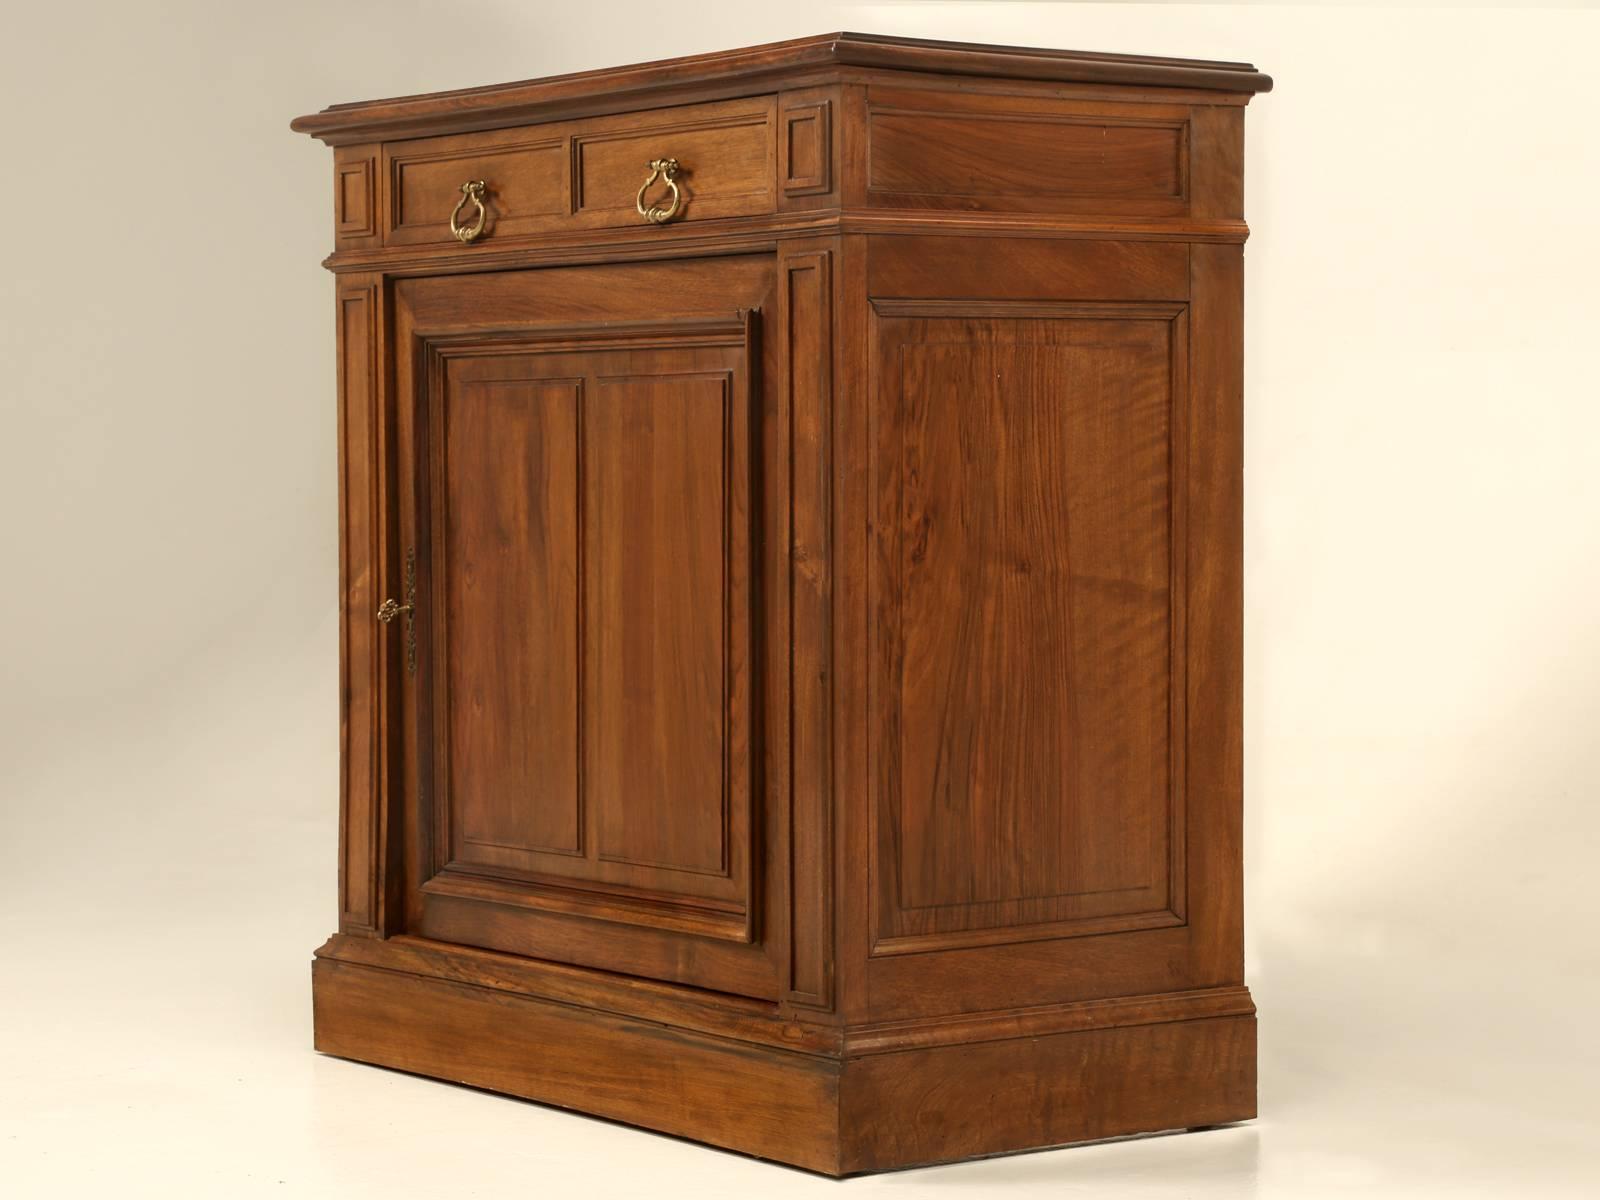 French walnut petite buffet or cupboard that would make for an excellent powder room vanity or just some extra storage in a tight quarter. Restored inside and out and requires nothing more before delivery. Please note we have one more just a smidge